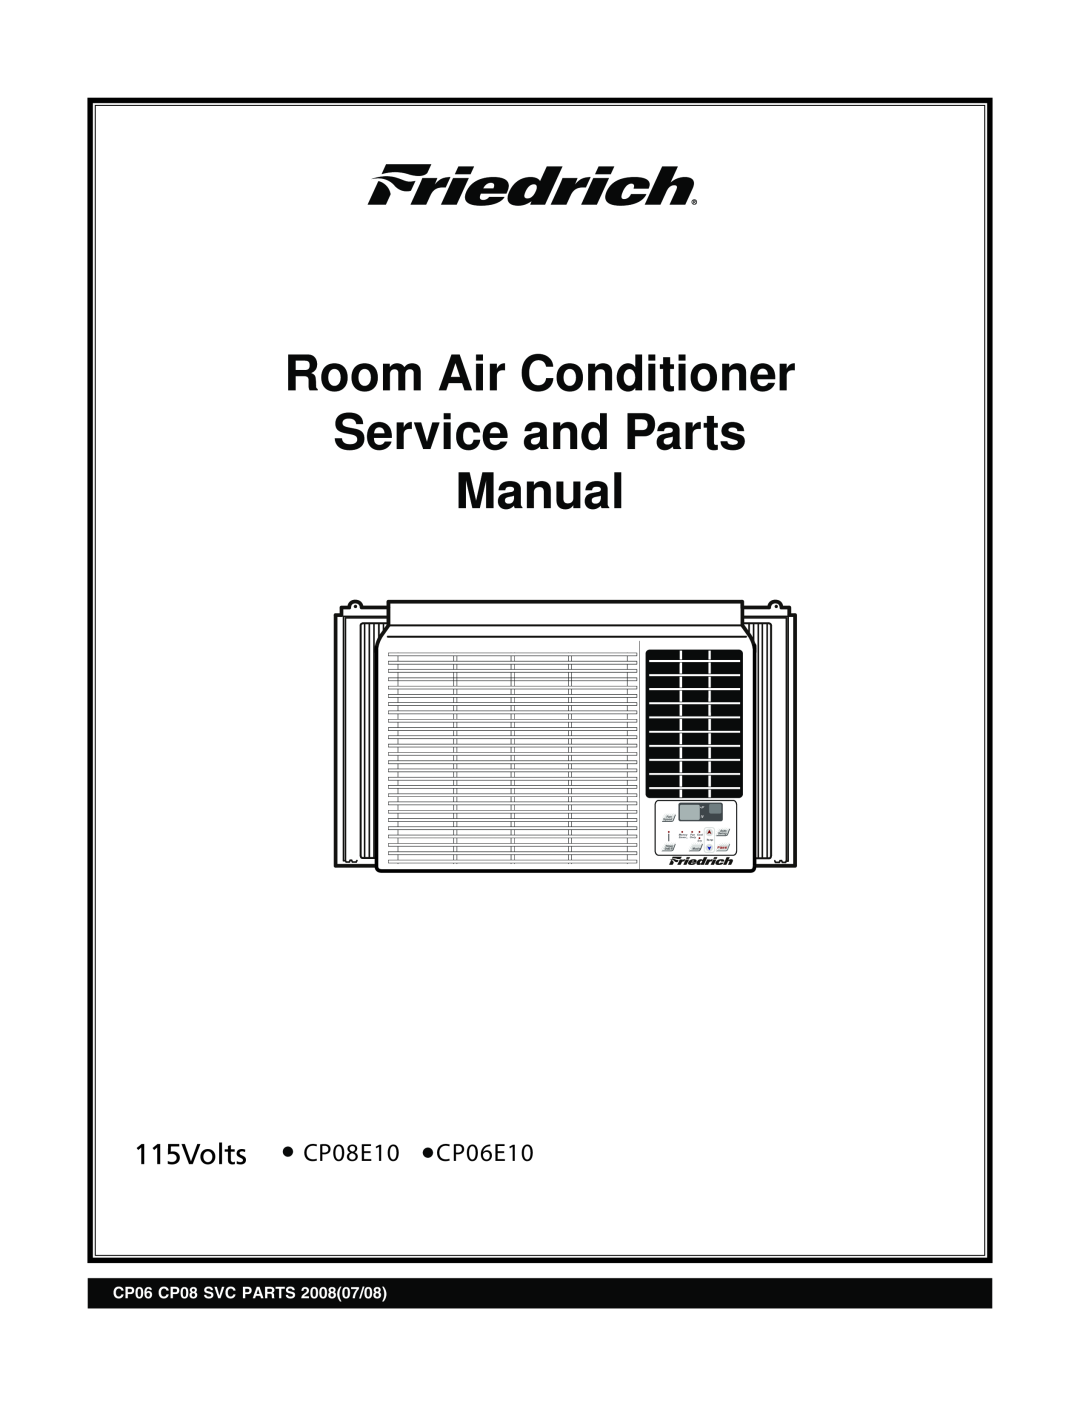 Friedrich CP06E10 manual Room Air Conditioner, Service and Parts, Manual, CP08E10, CP06 CP08 SVC PARTS 200807/08, Speed 